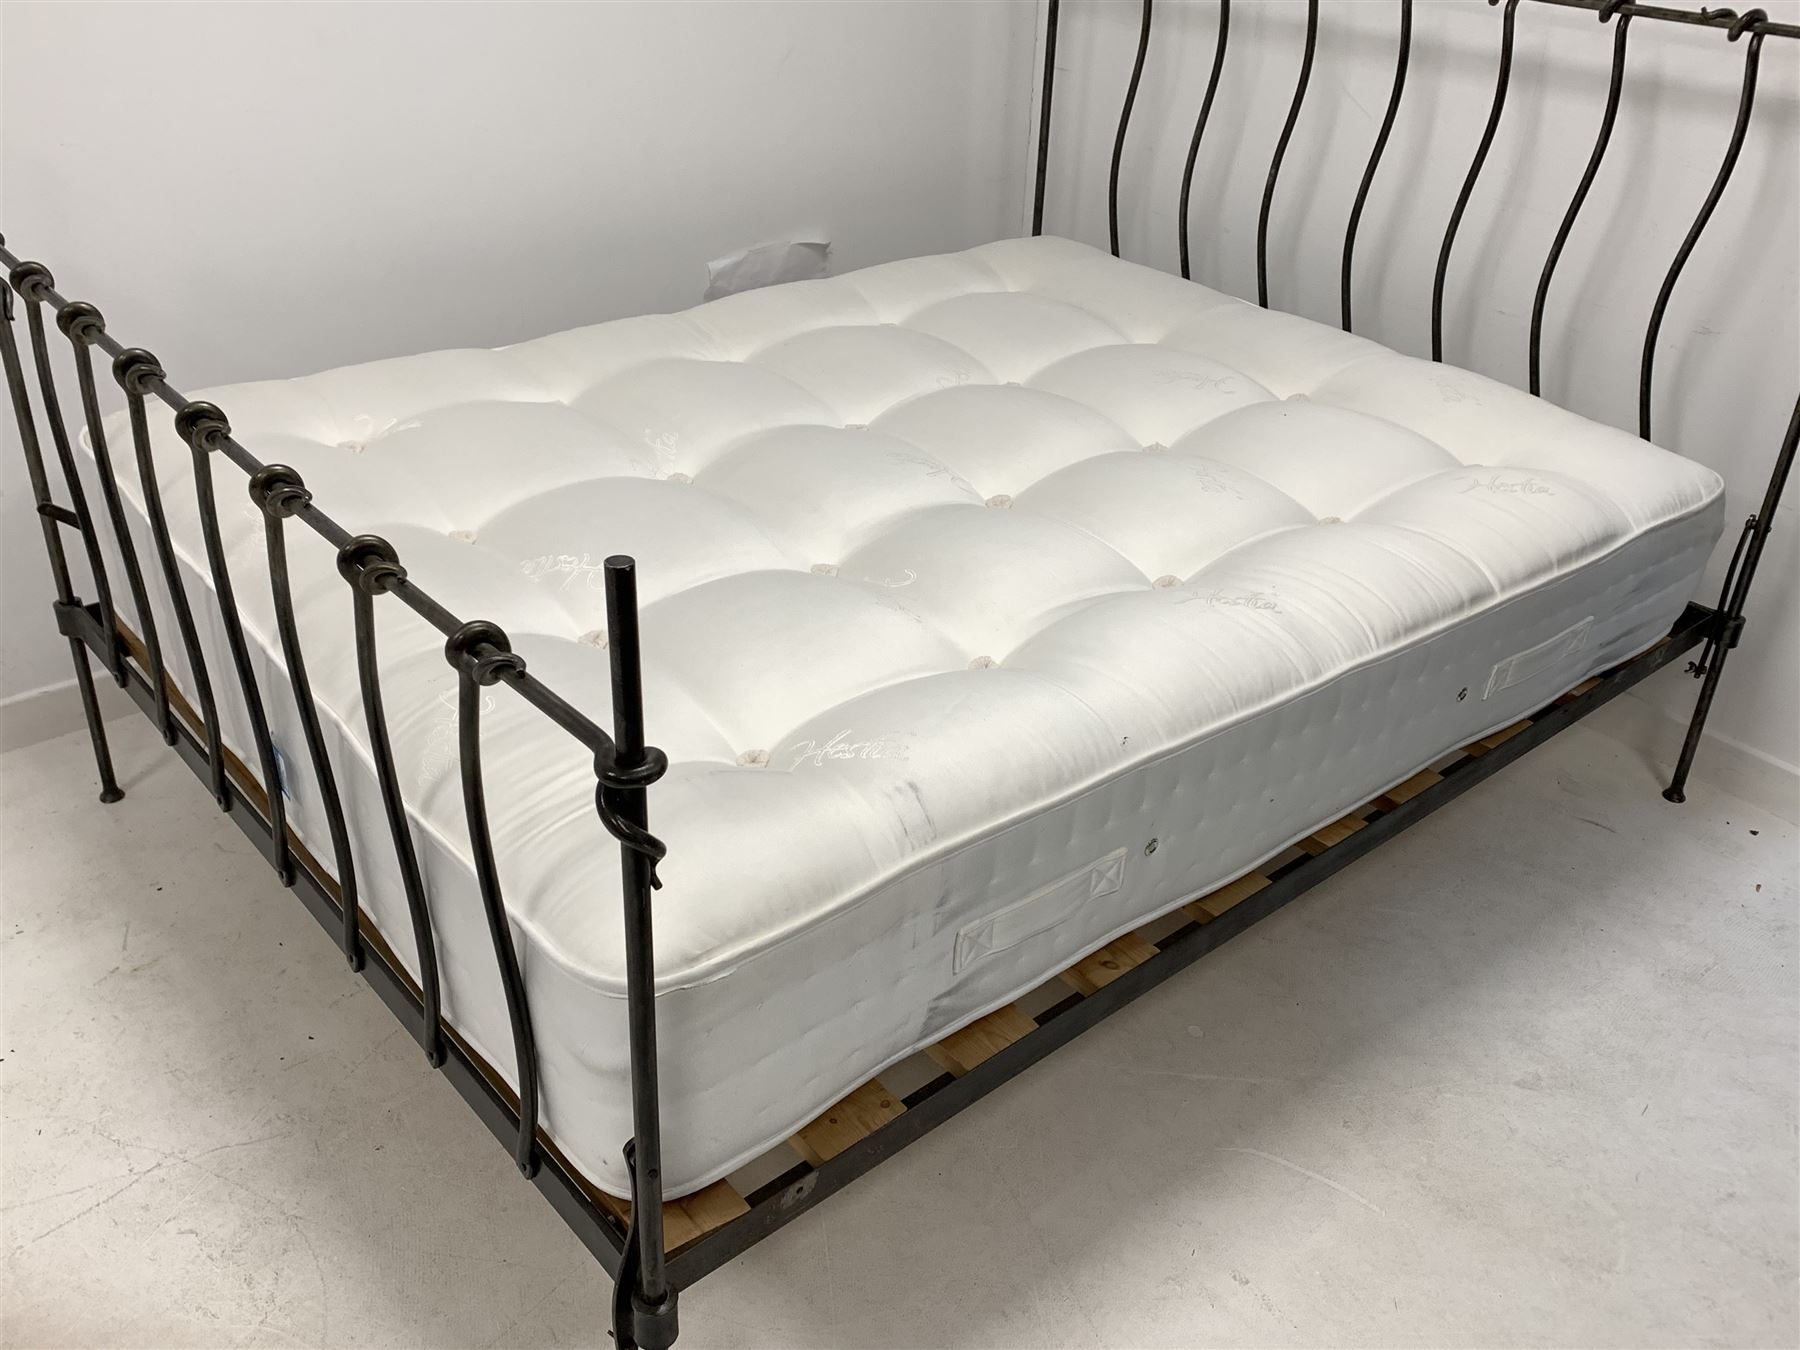 Wrought metal 5' double bed - Image 2 of 3